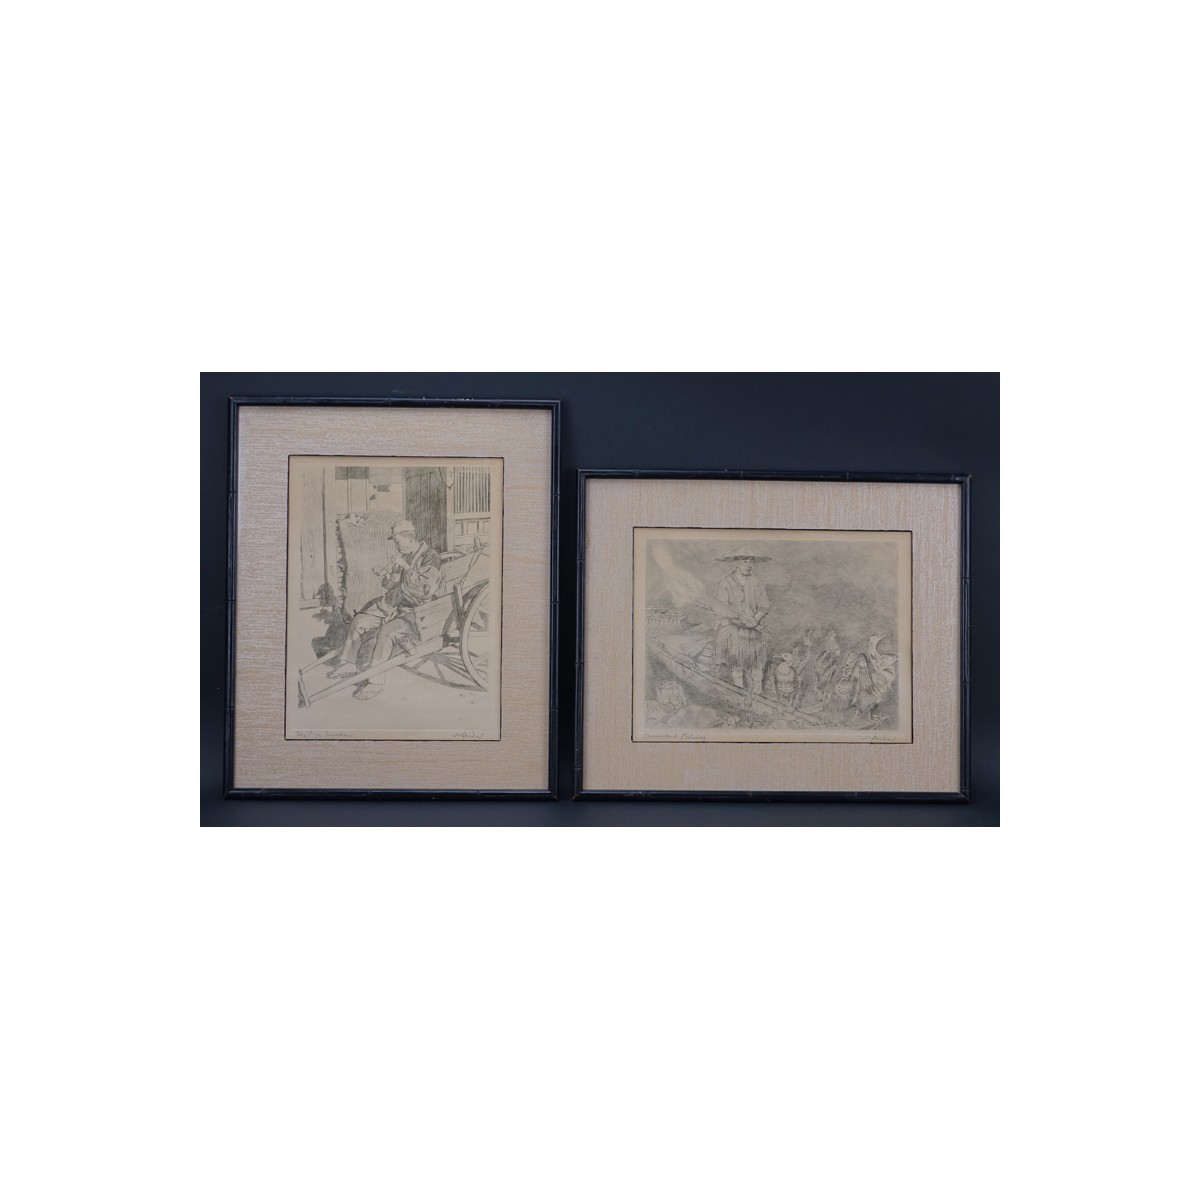 Willy Seiler, German (1903 - 1988) Two Etchings, "Cormorant Fishing" and "The Pipe Smoker", Each Signed and Titled in Pencil. Each in good condition.